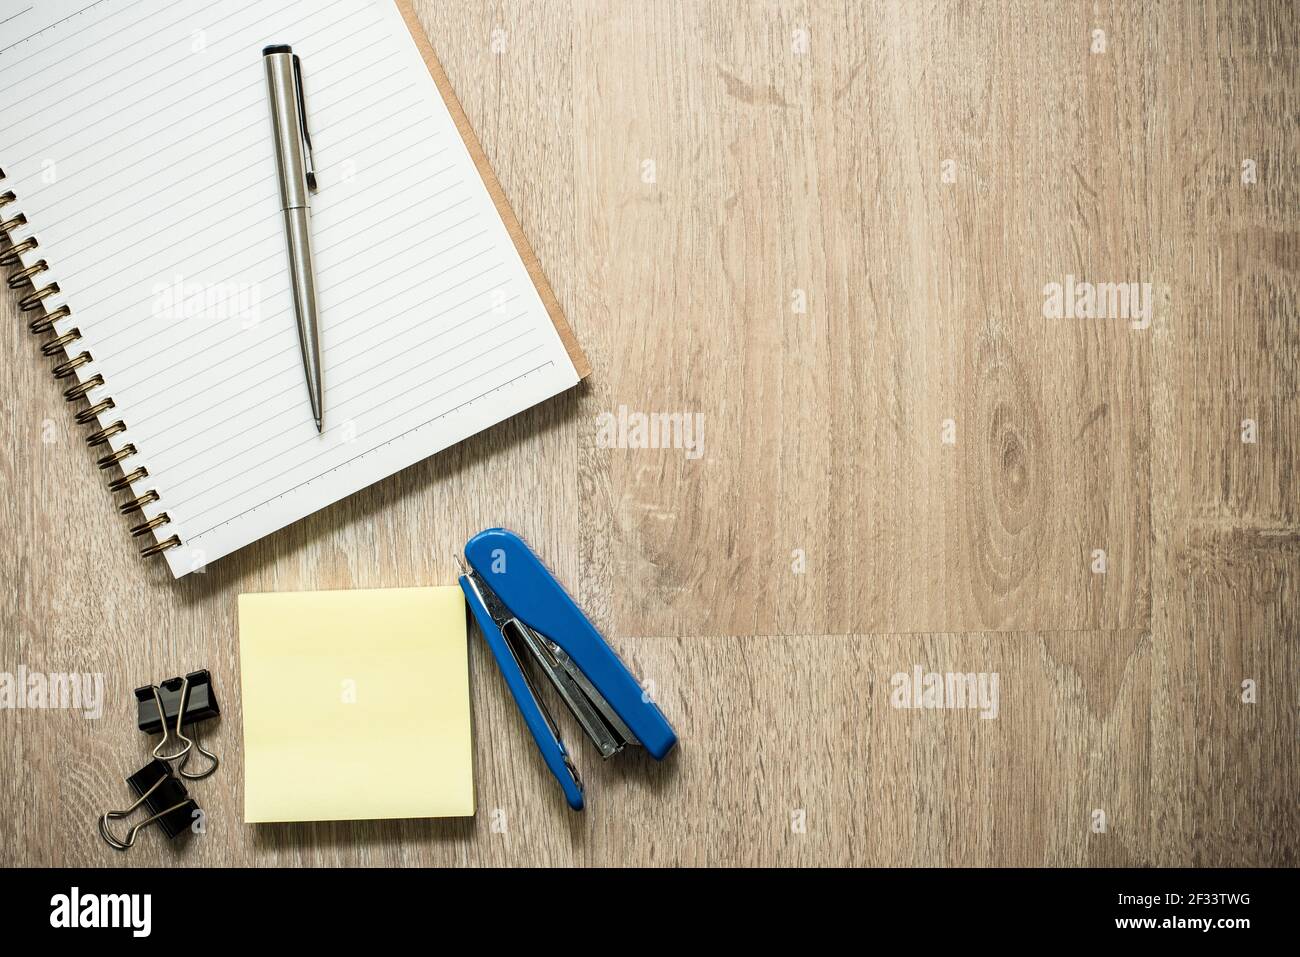 Notebook with some office stationery supplies on wood background, top view (flat lay) with copy space Stock Photo